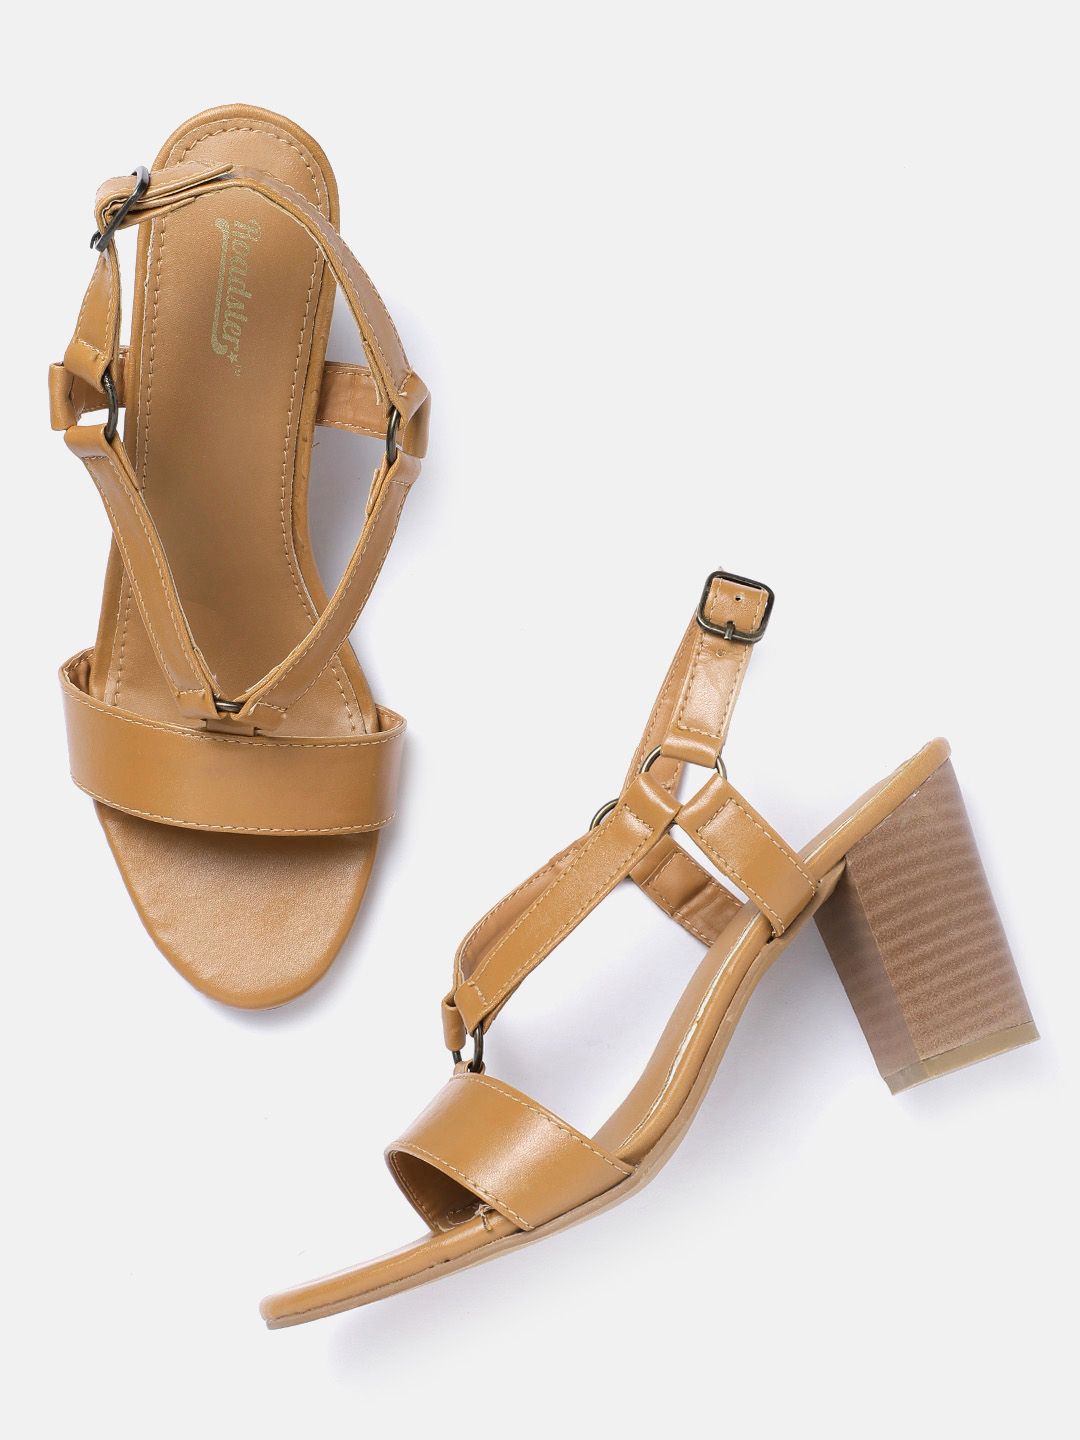 Roadster Nude-Coloured Block Sandals Price in India